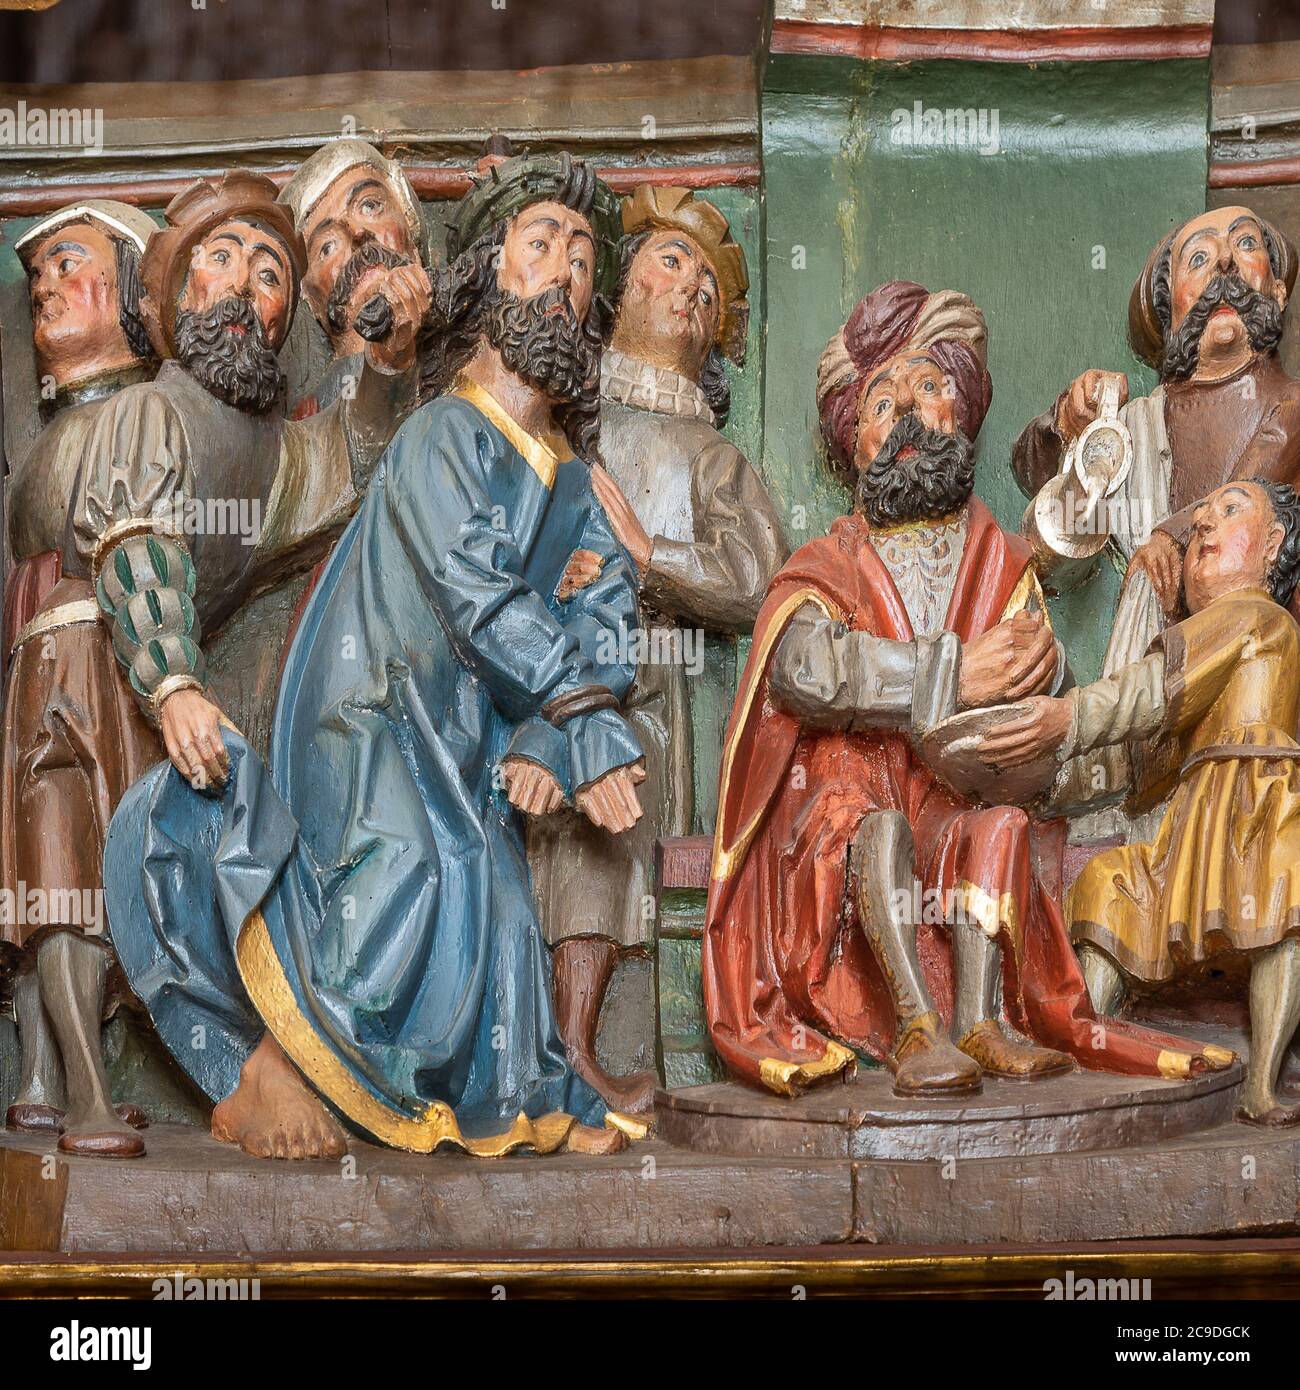 Jesus befor Pilate, an Altar-piece from the beginning of the 16th century, Hagested, Denmark, July 16, 2020 Stock Photo